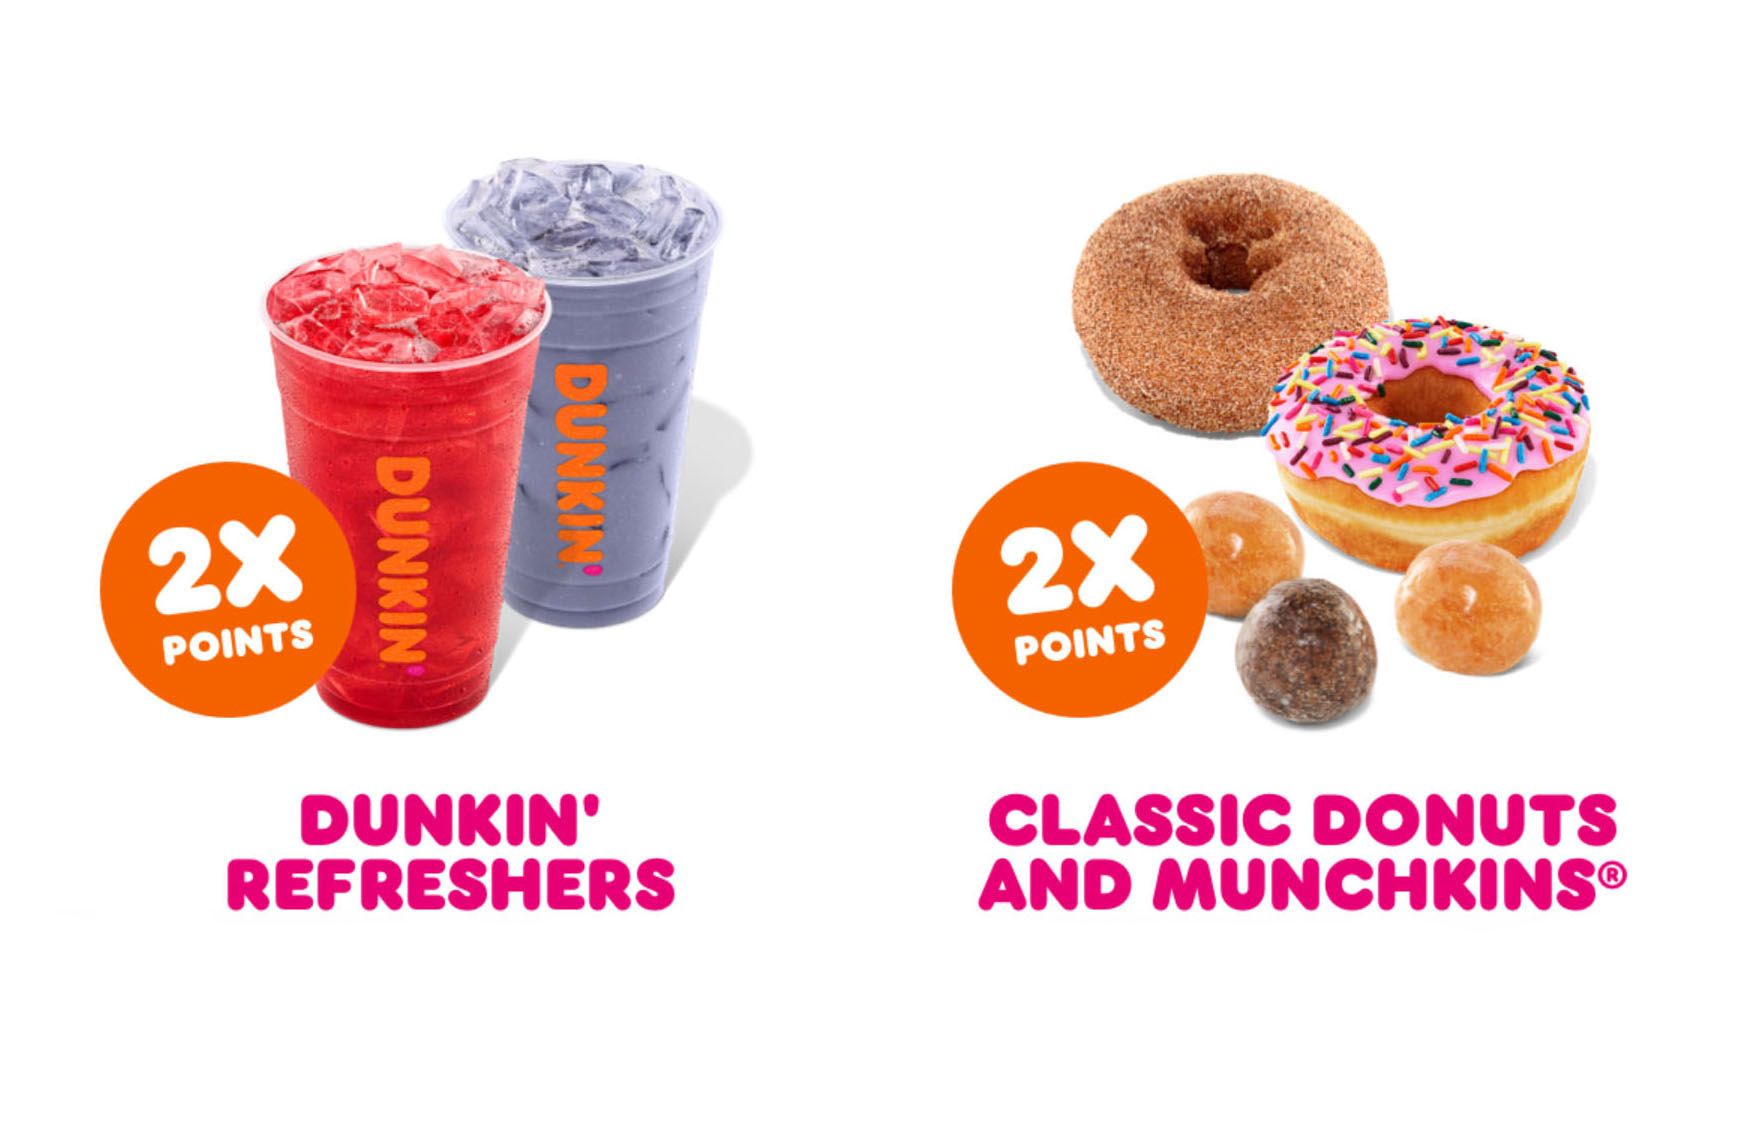 Receive Double the Rewards Points on Classic Donuts, Munchkins and Dunkin’ Refreshers 